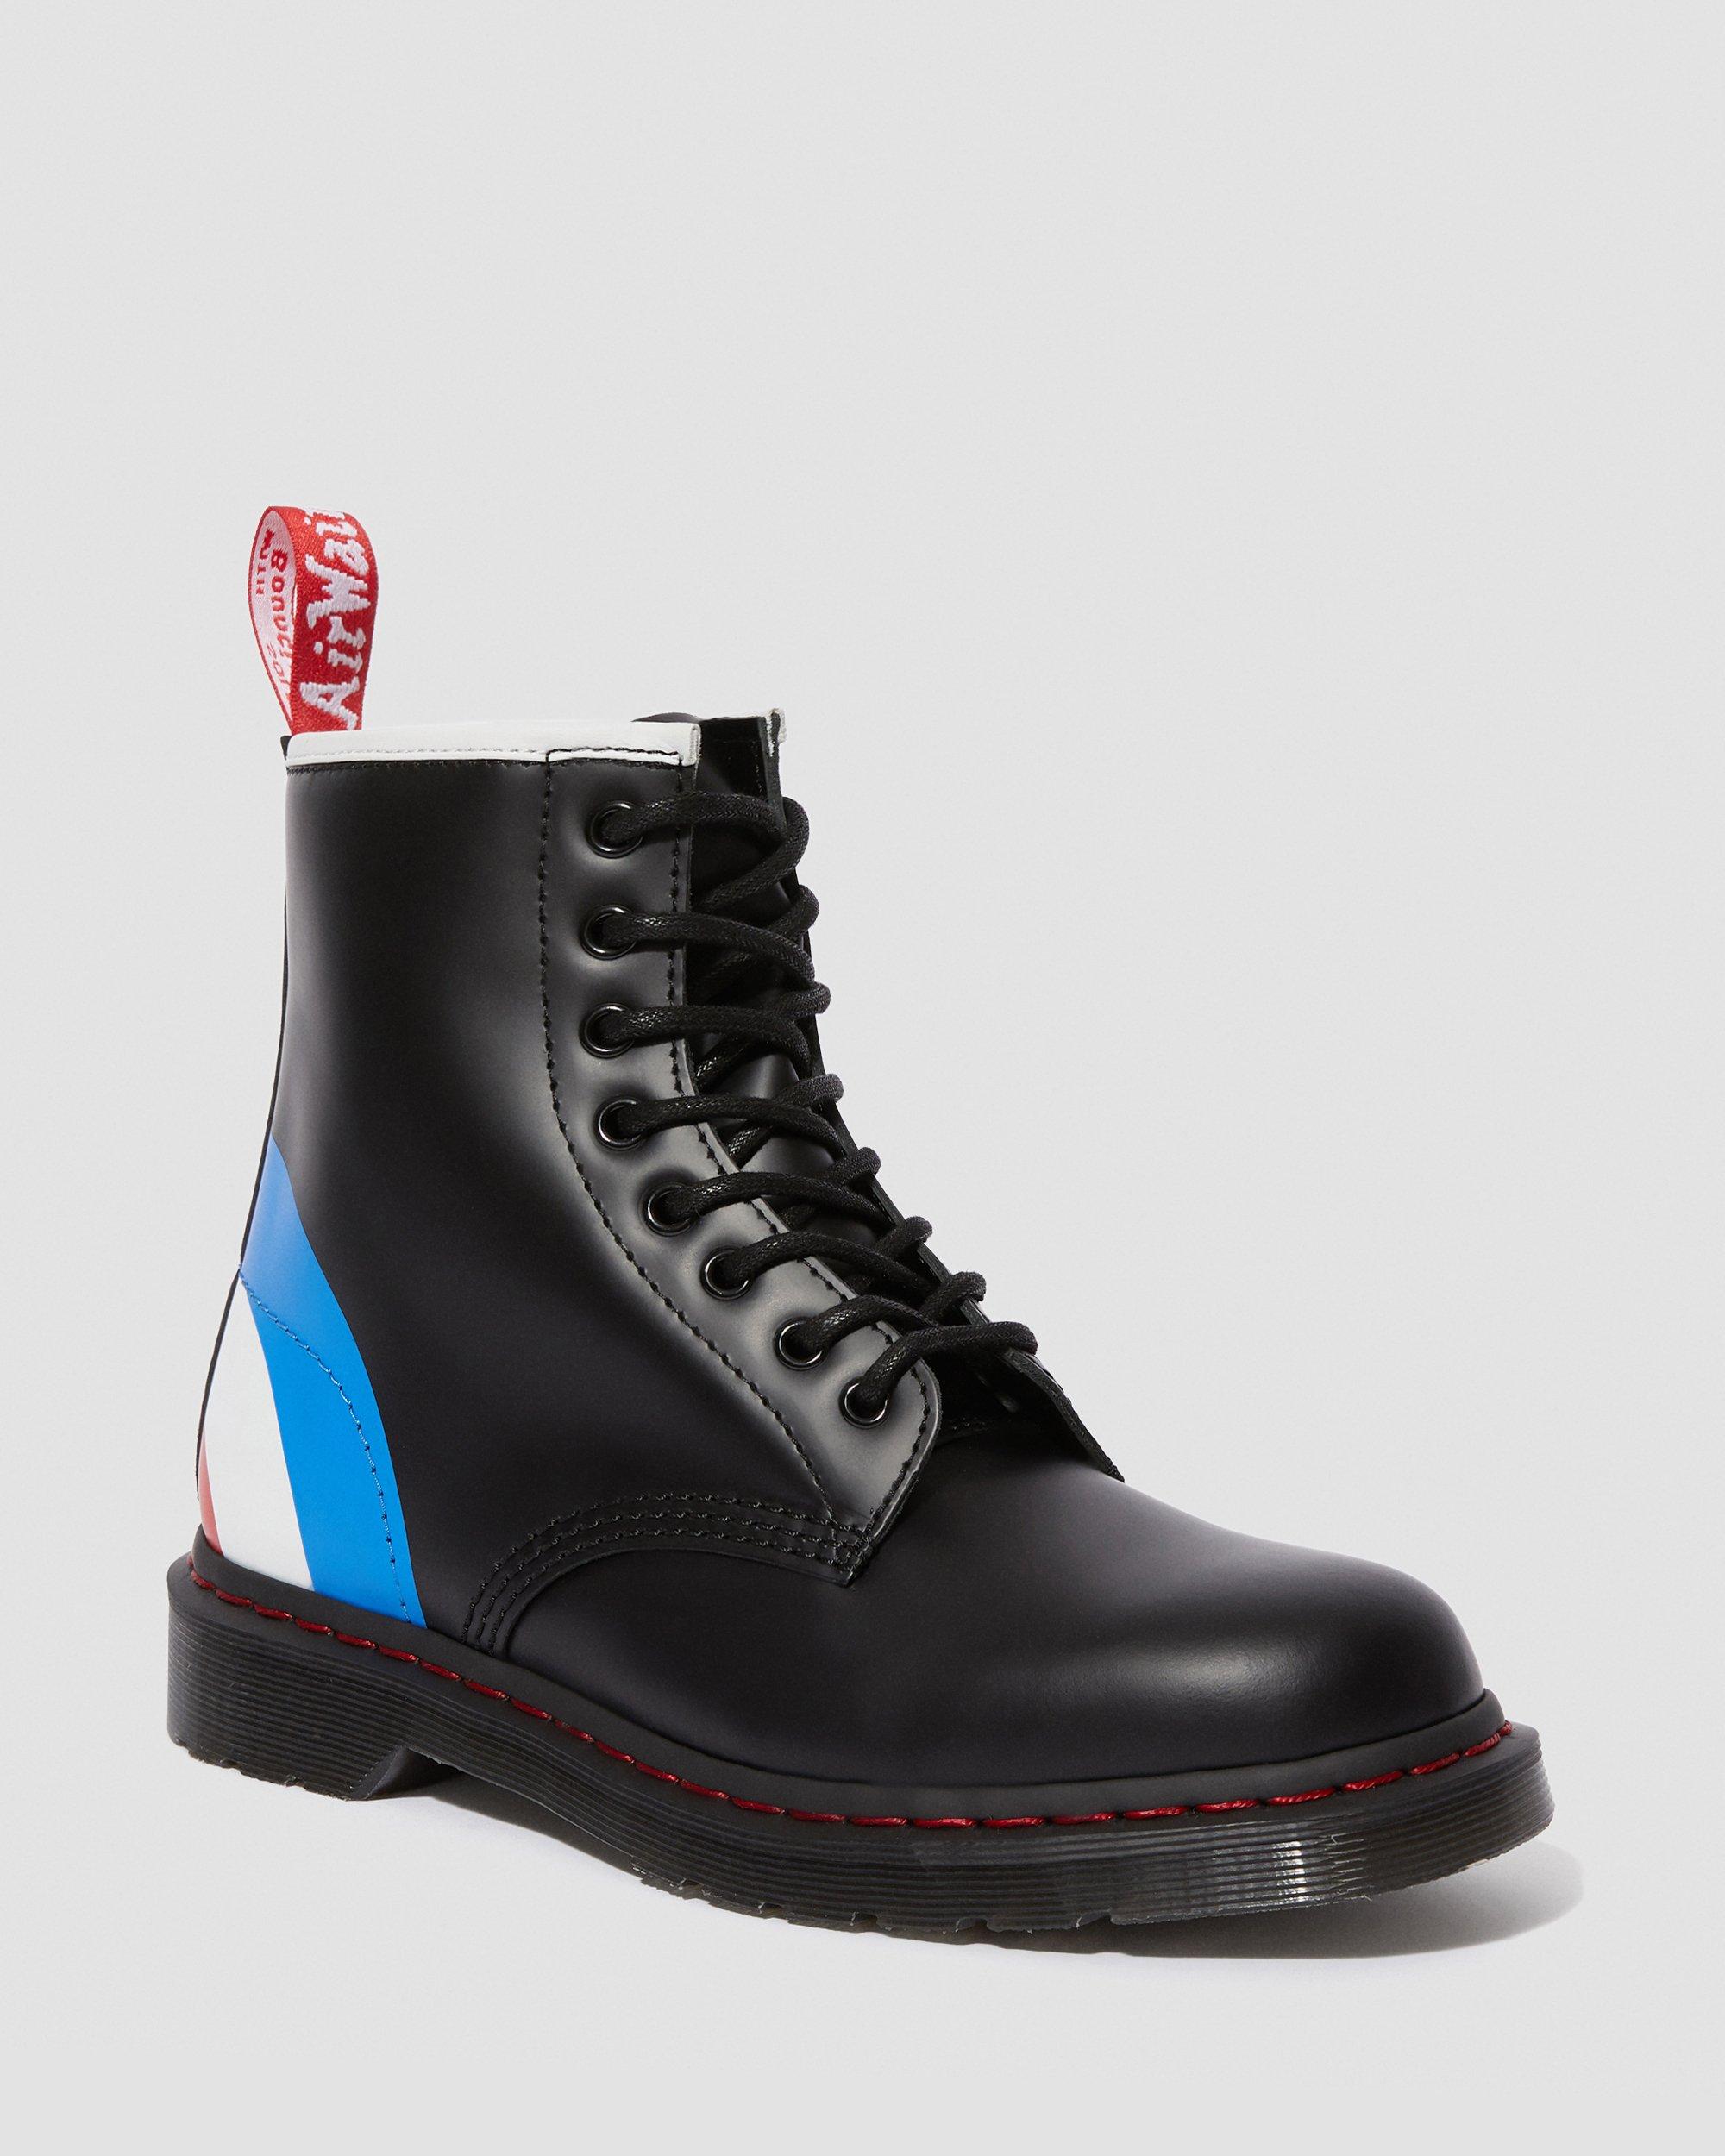 THE WHO 1460 | Dr. Martens